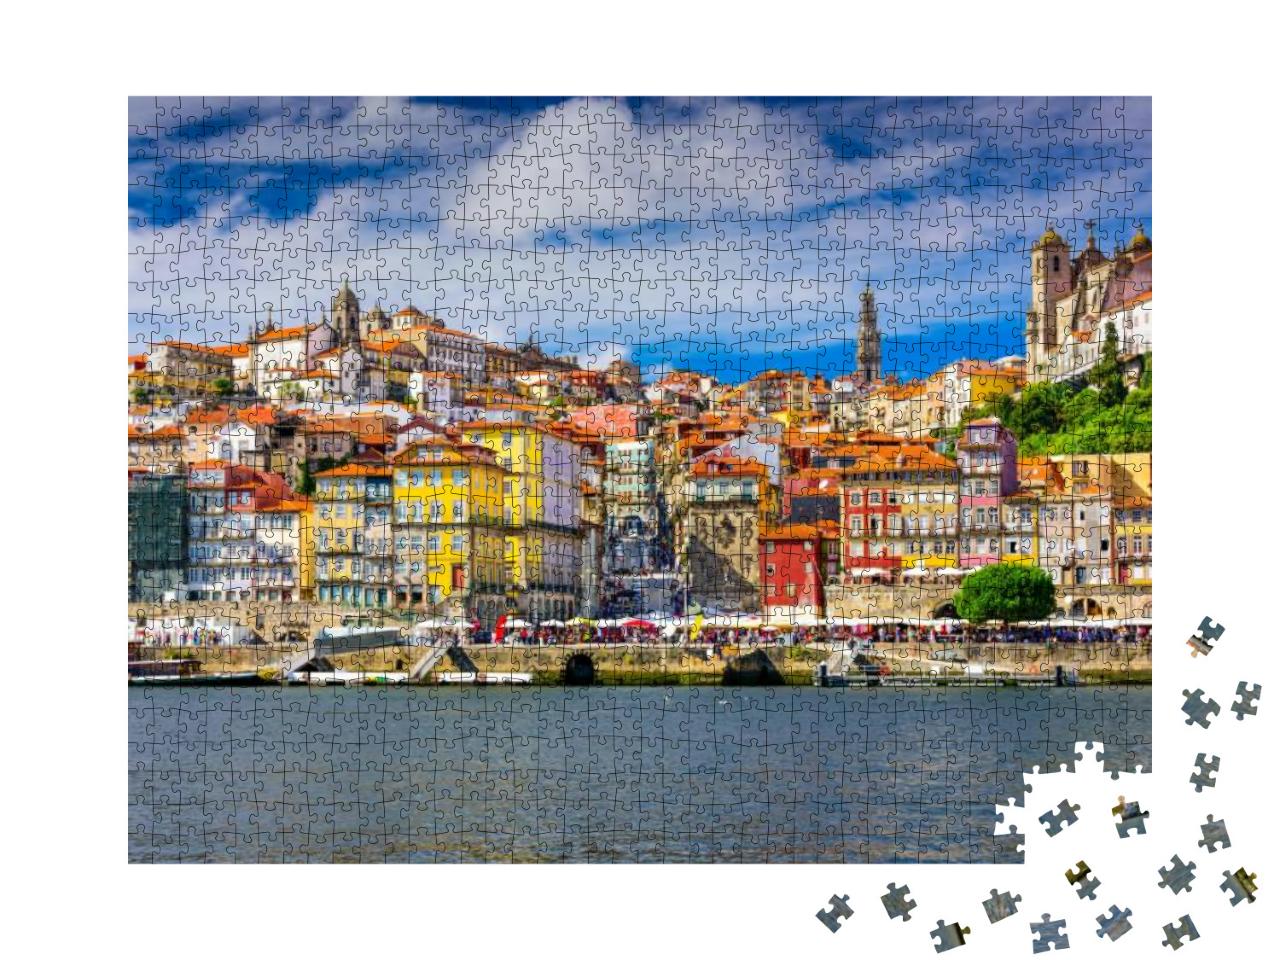 Porto, Portugal Old Town Skyline from Across the Douro Ri... Jigsaw Puzzle with 1000 pieces